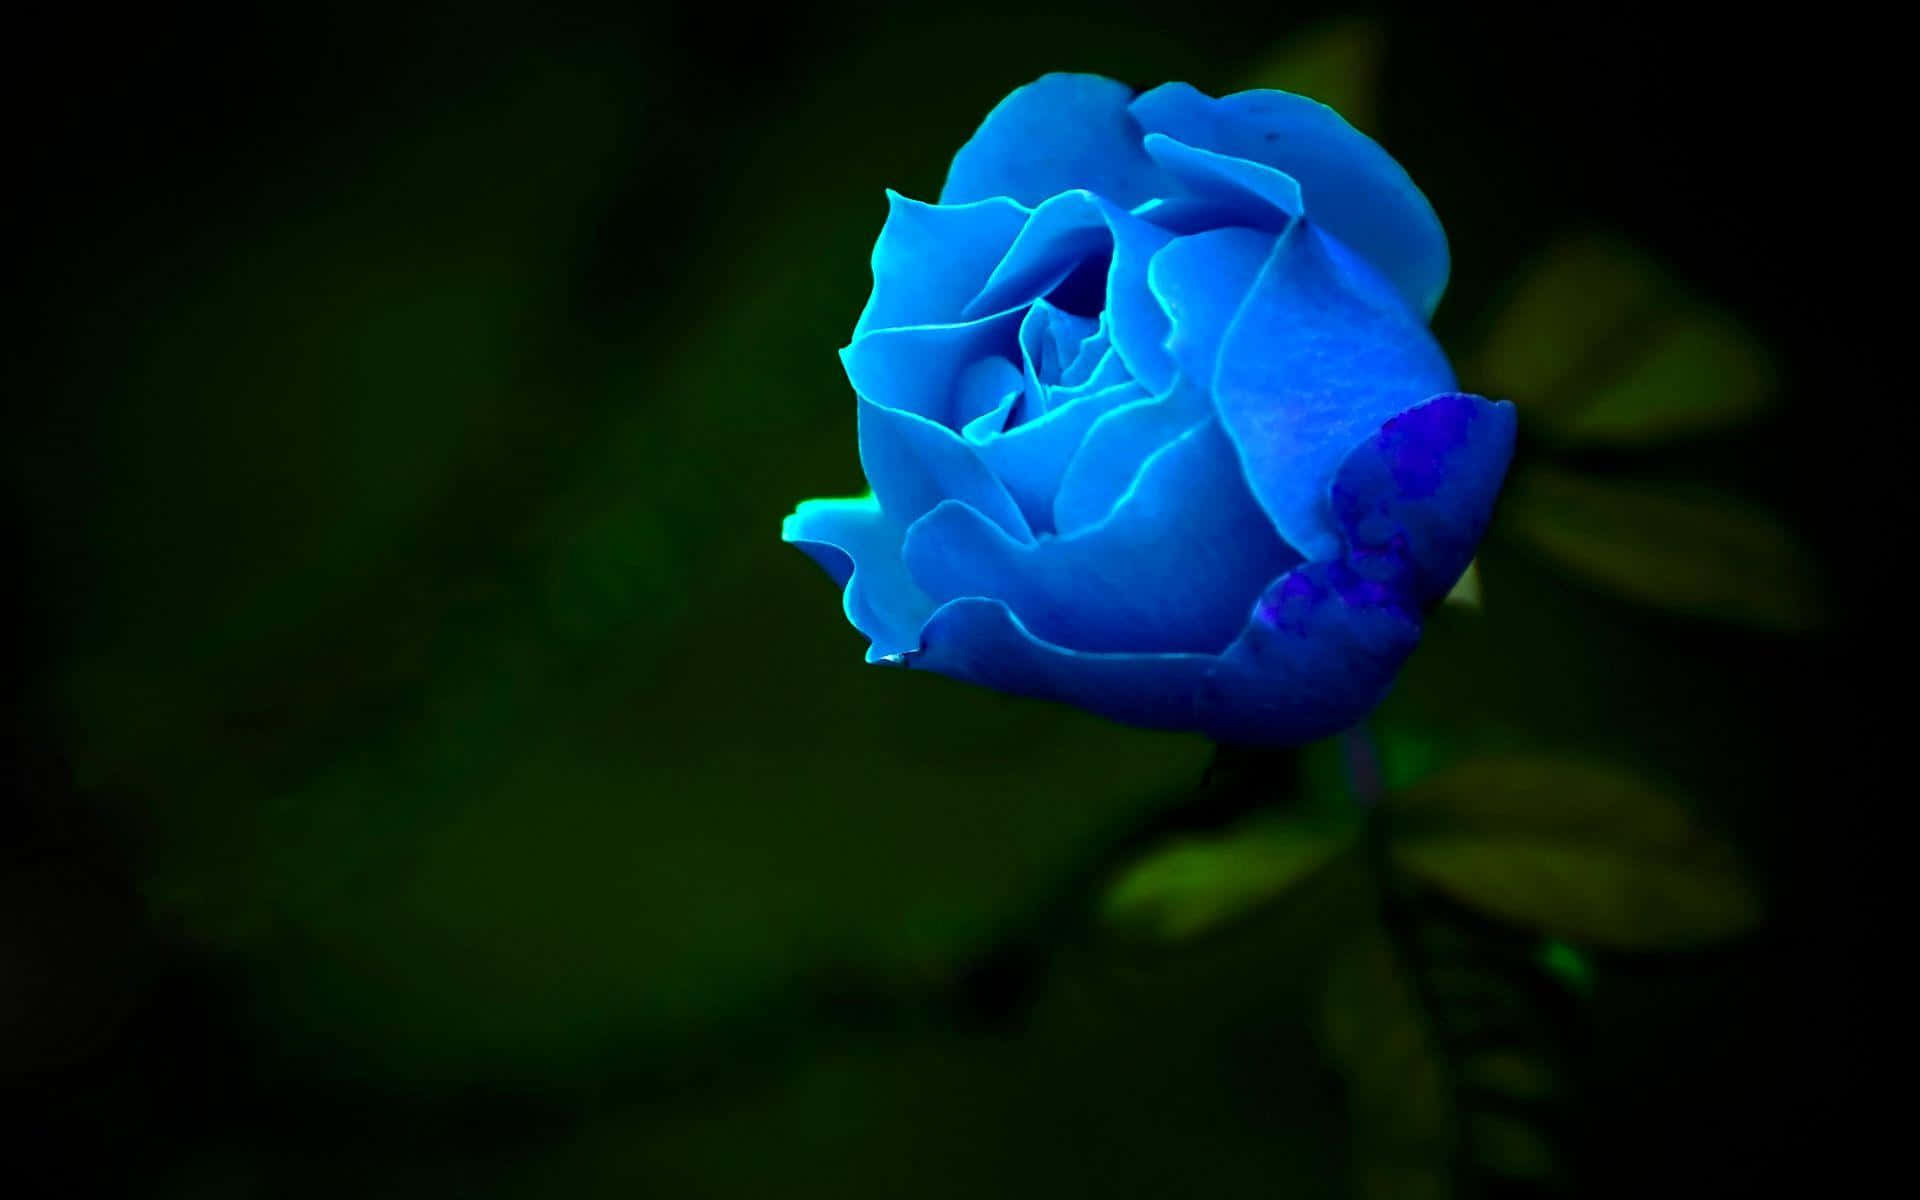 A Blue Rose Is Shown In The Dark